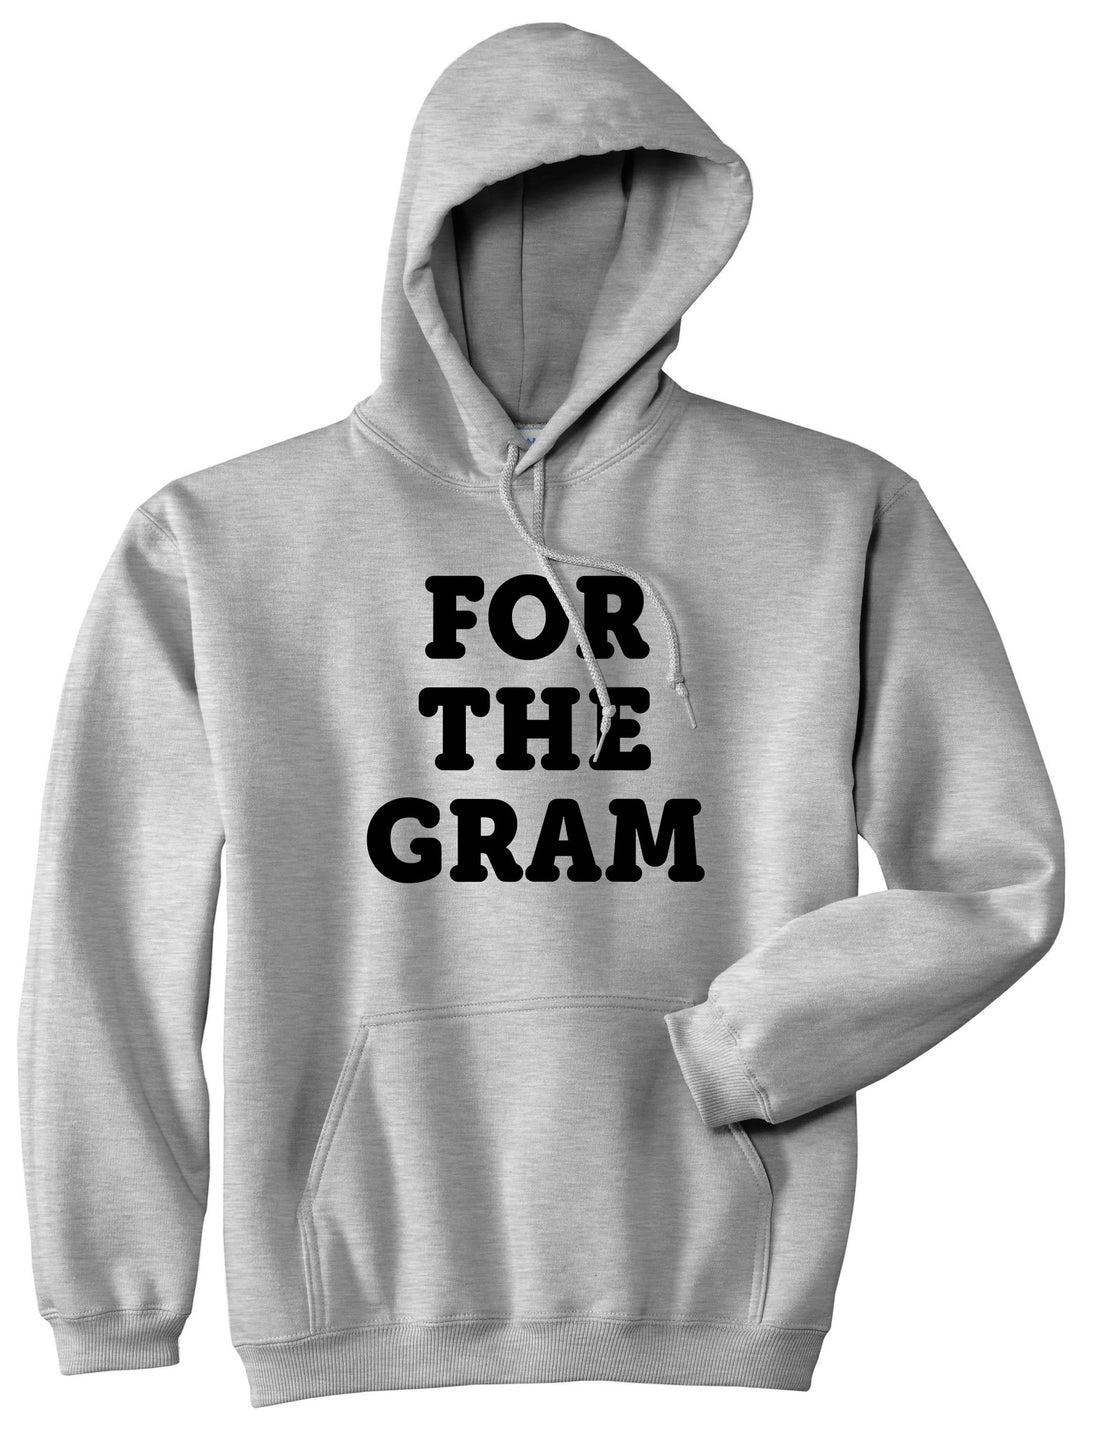 Do It For The Gram Pullover Hoodie Hoody by Kings Of NY